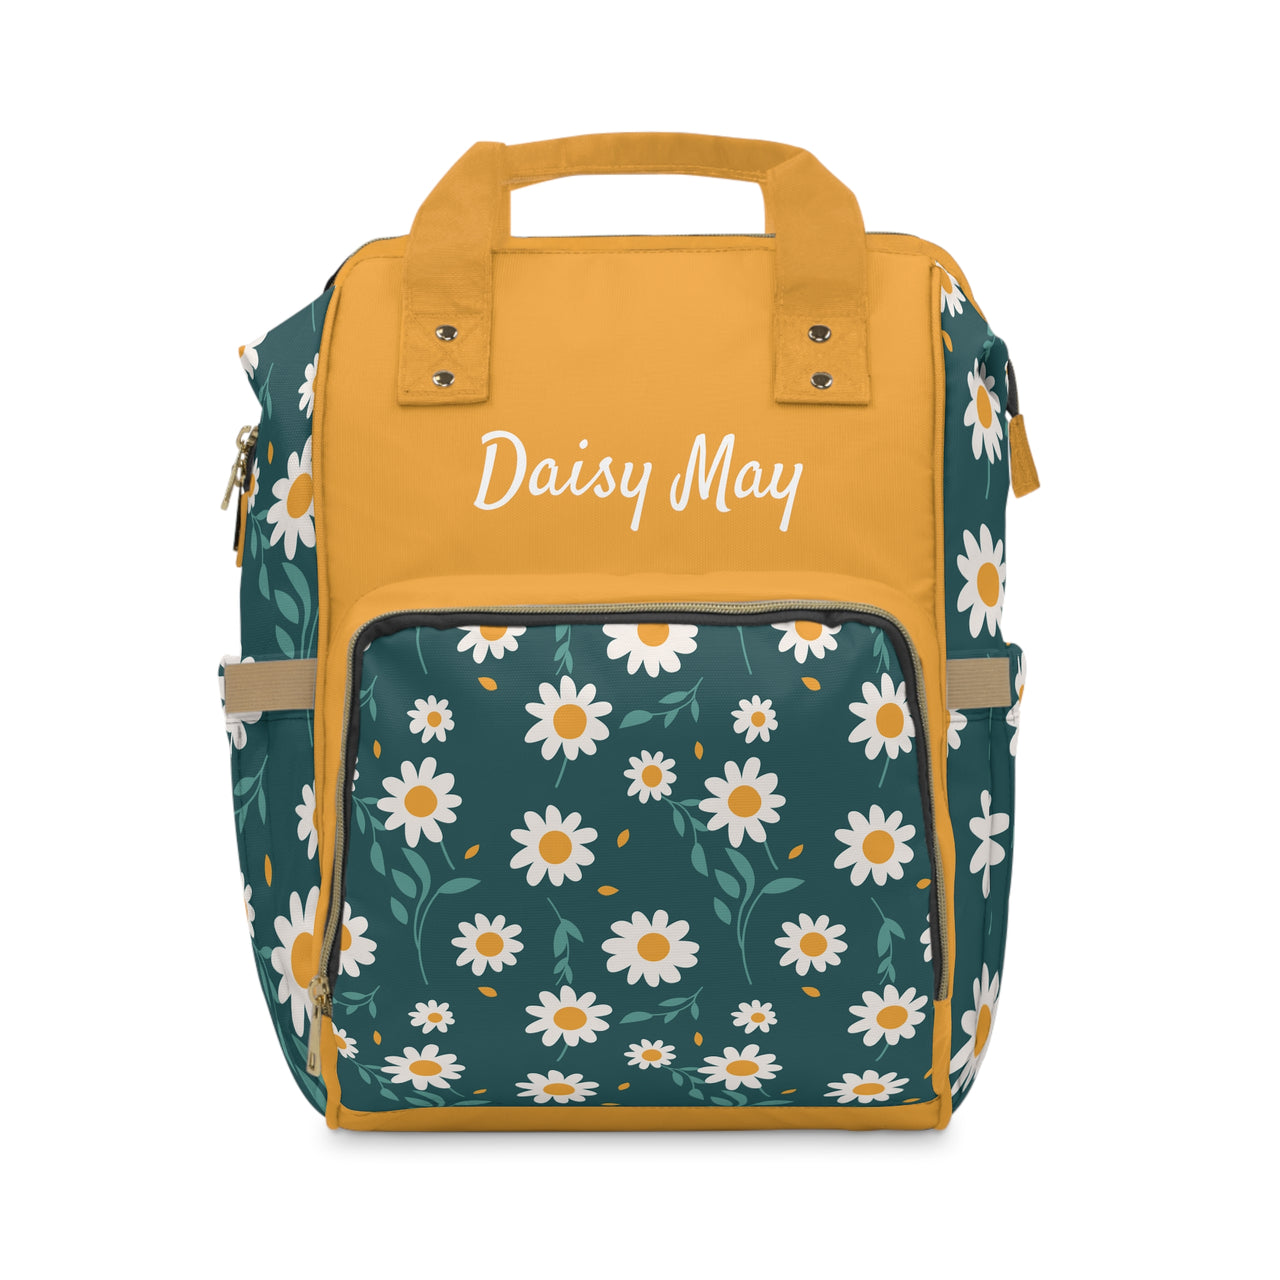 Personalized Cute Daisy Girls Multifunctional Diaper Backpack, Newborn Gift, Baby Shower Gift, Baby Diaper Bag Nappy Stroller Bag